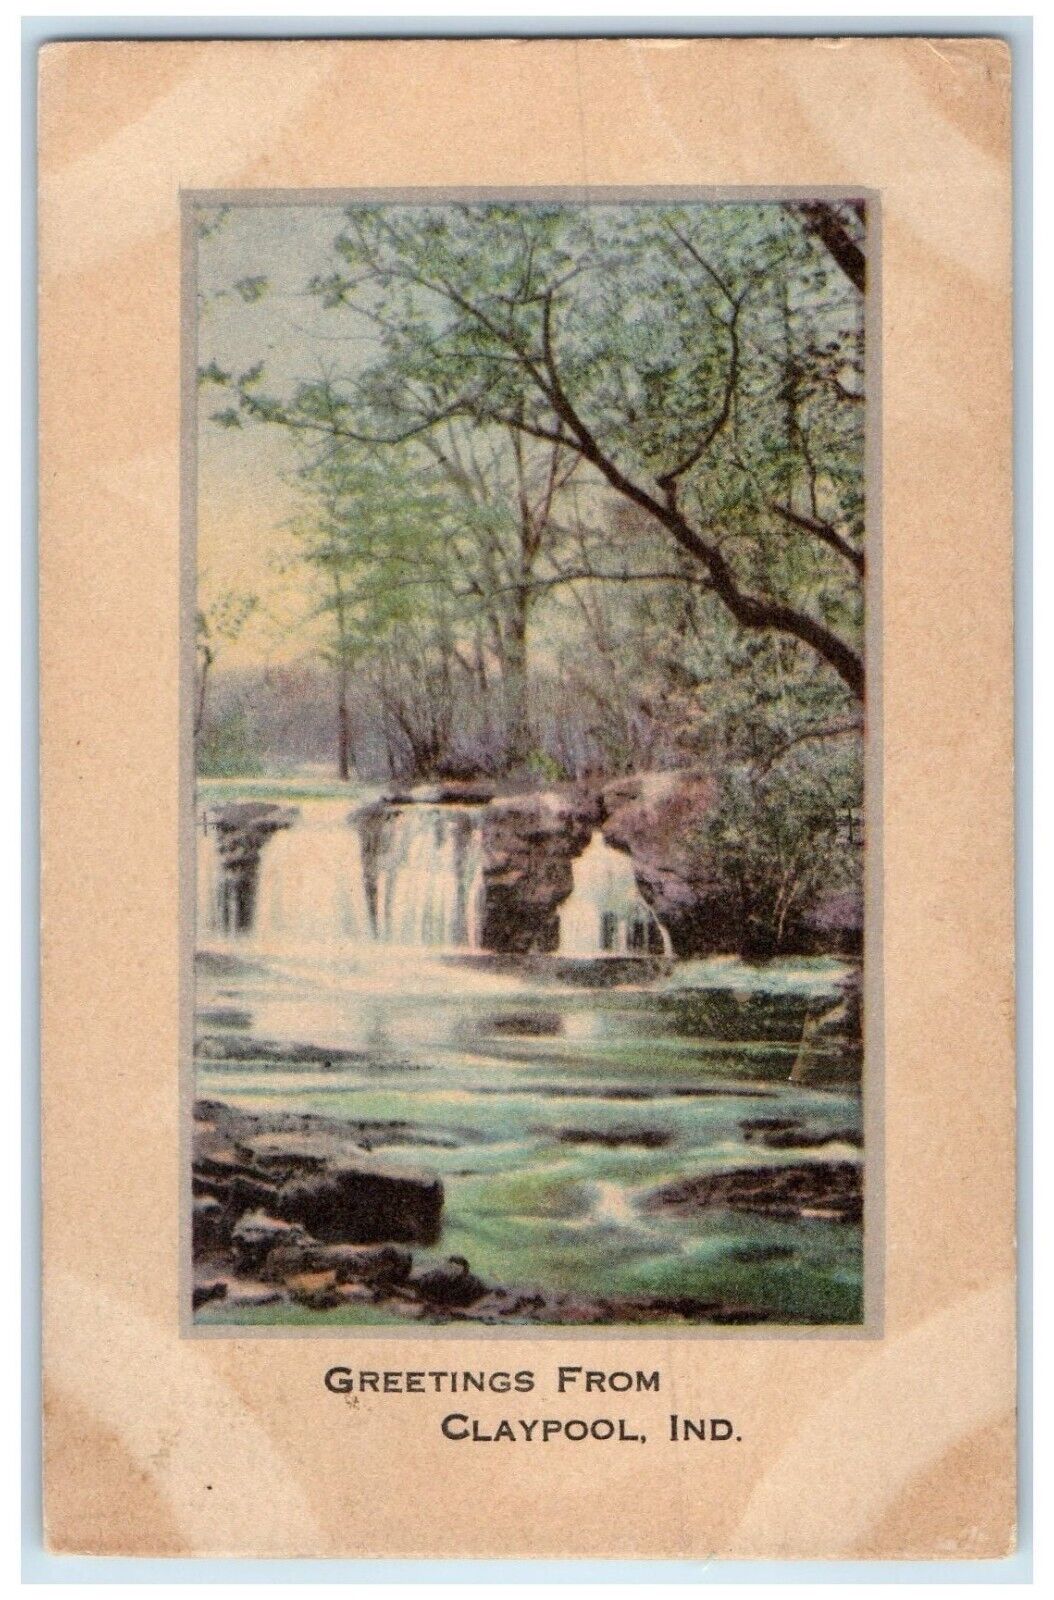 1917 Greetings From Falls Lake River Claypool Indiana Vintage Antique Postcard